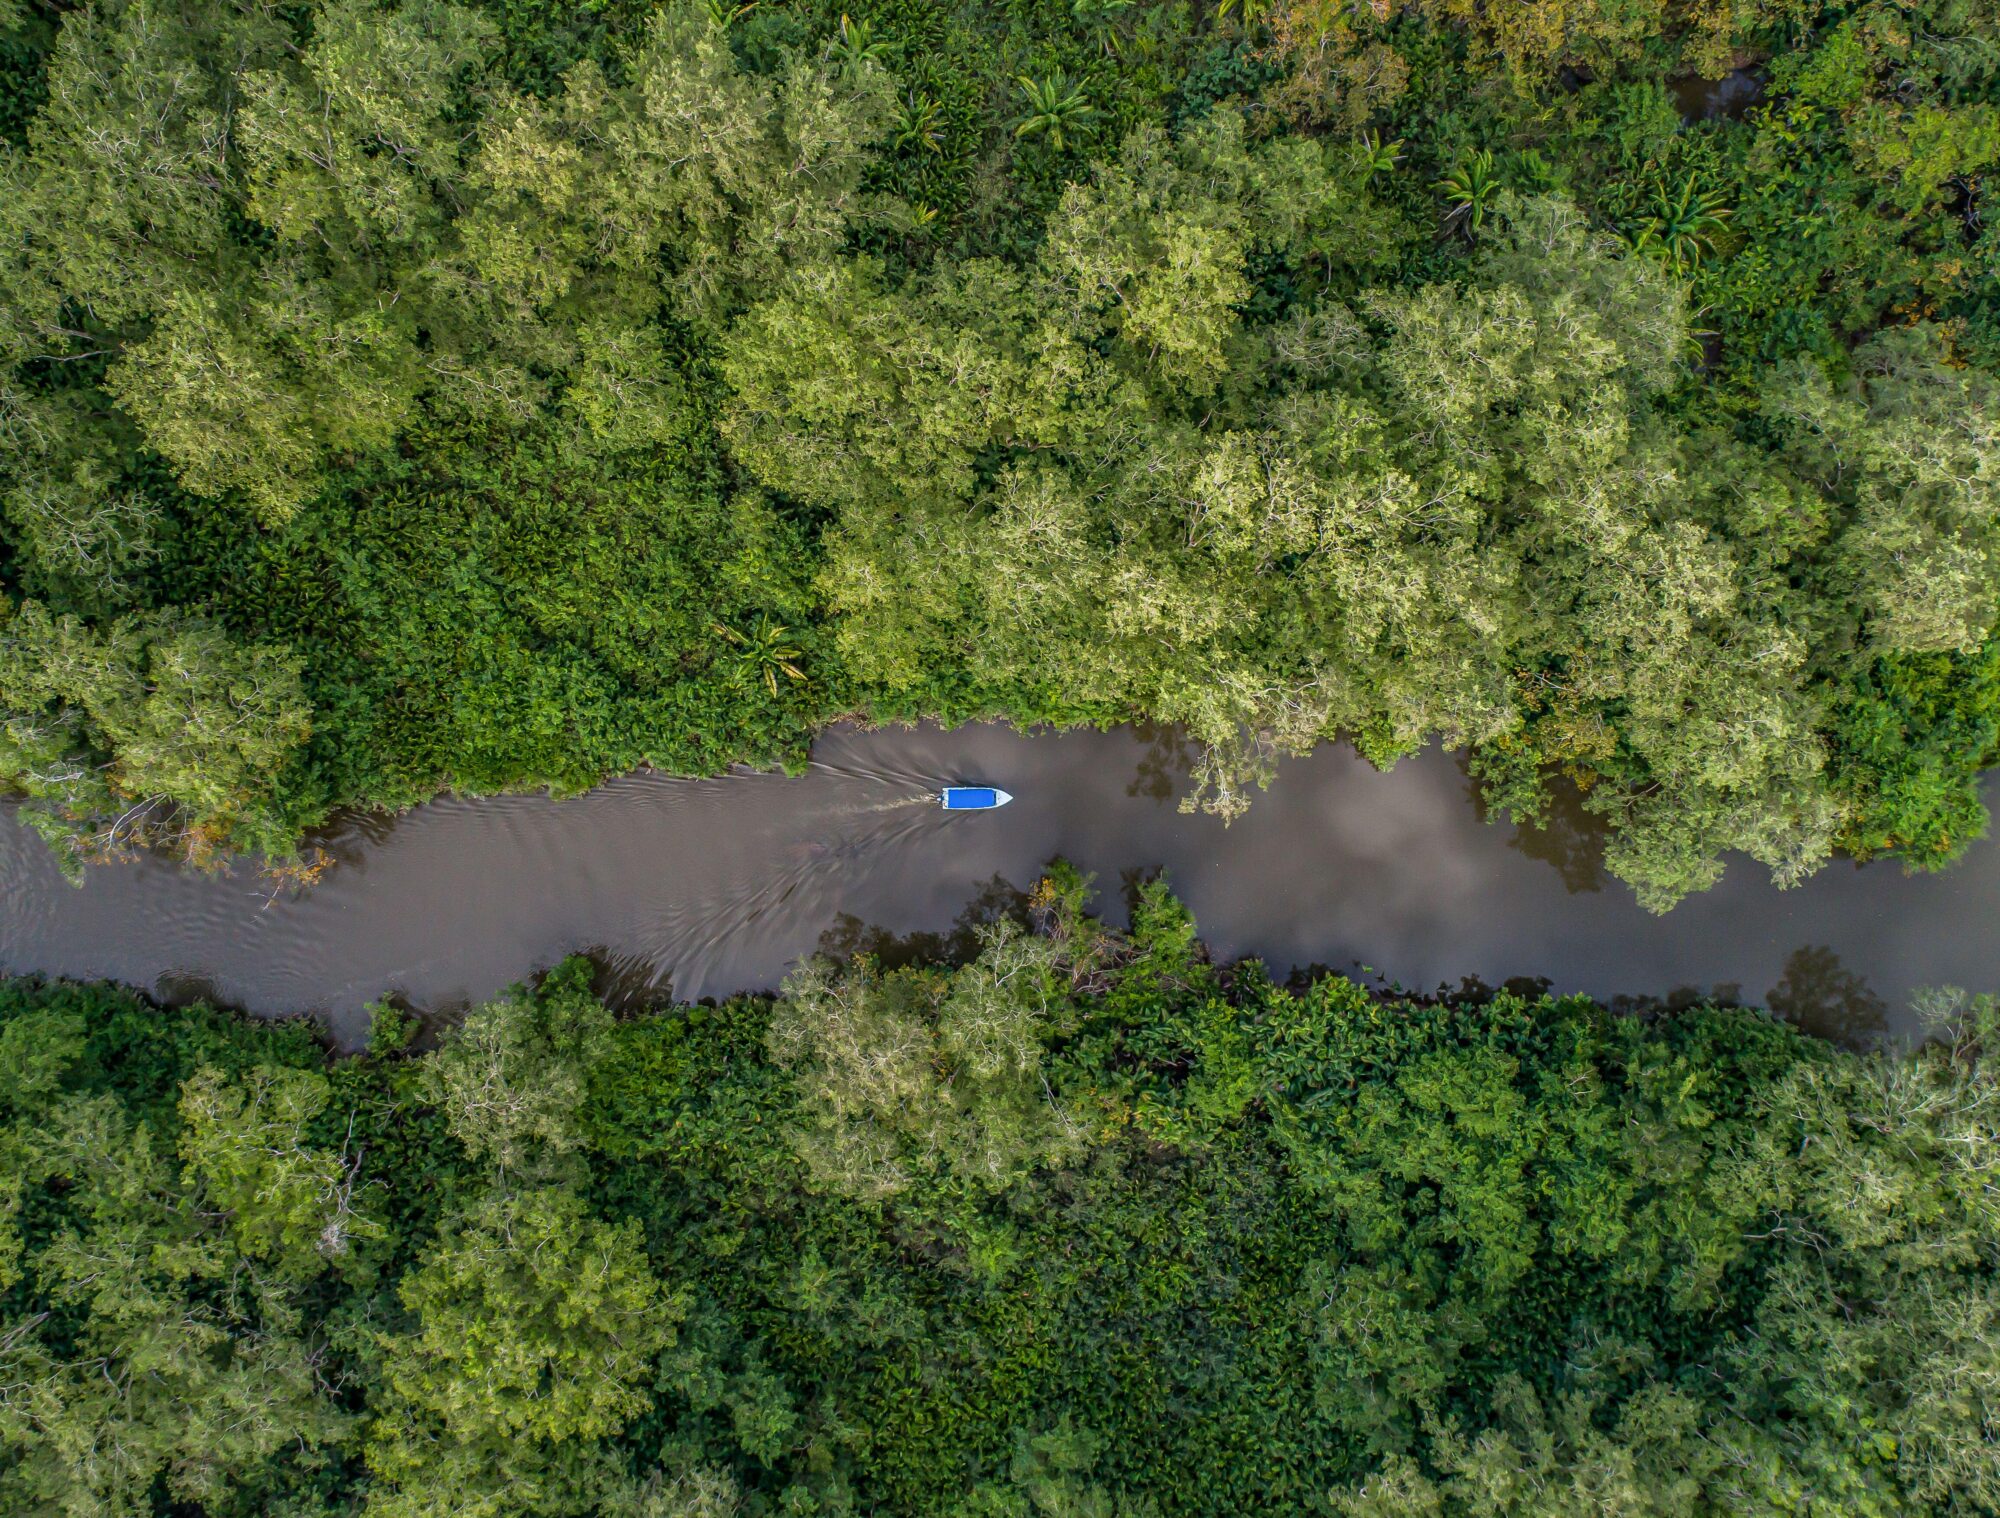 aerial view of a boat on a river surrounded by vegetation